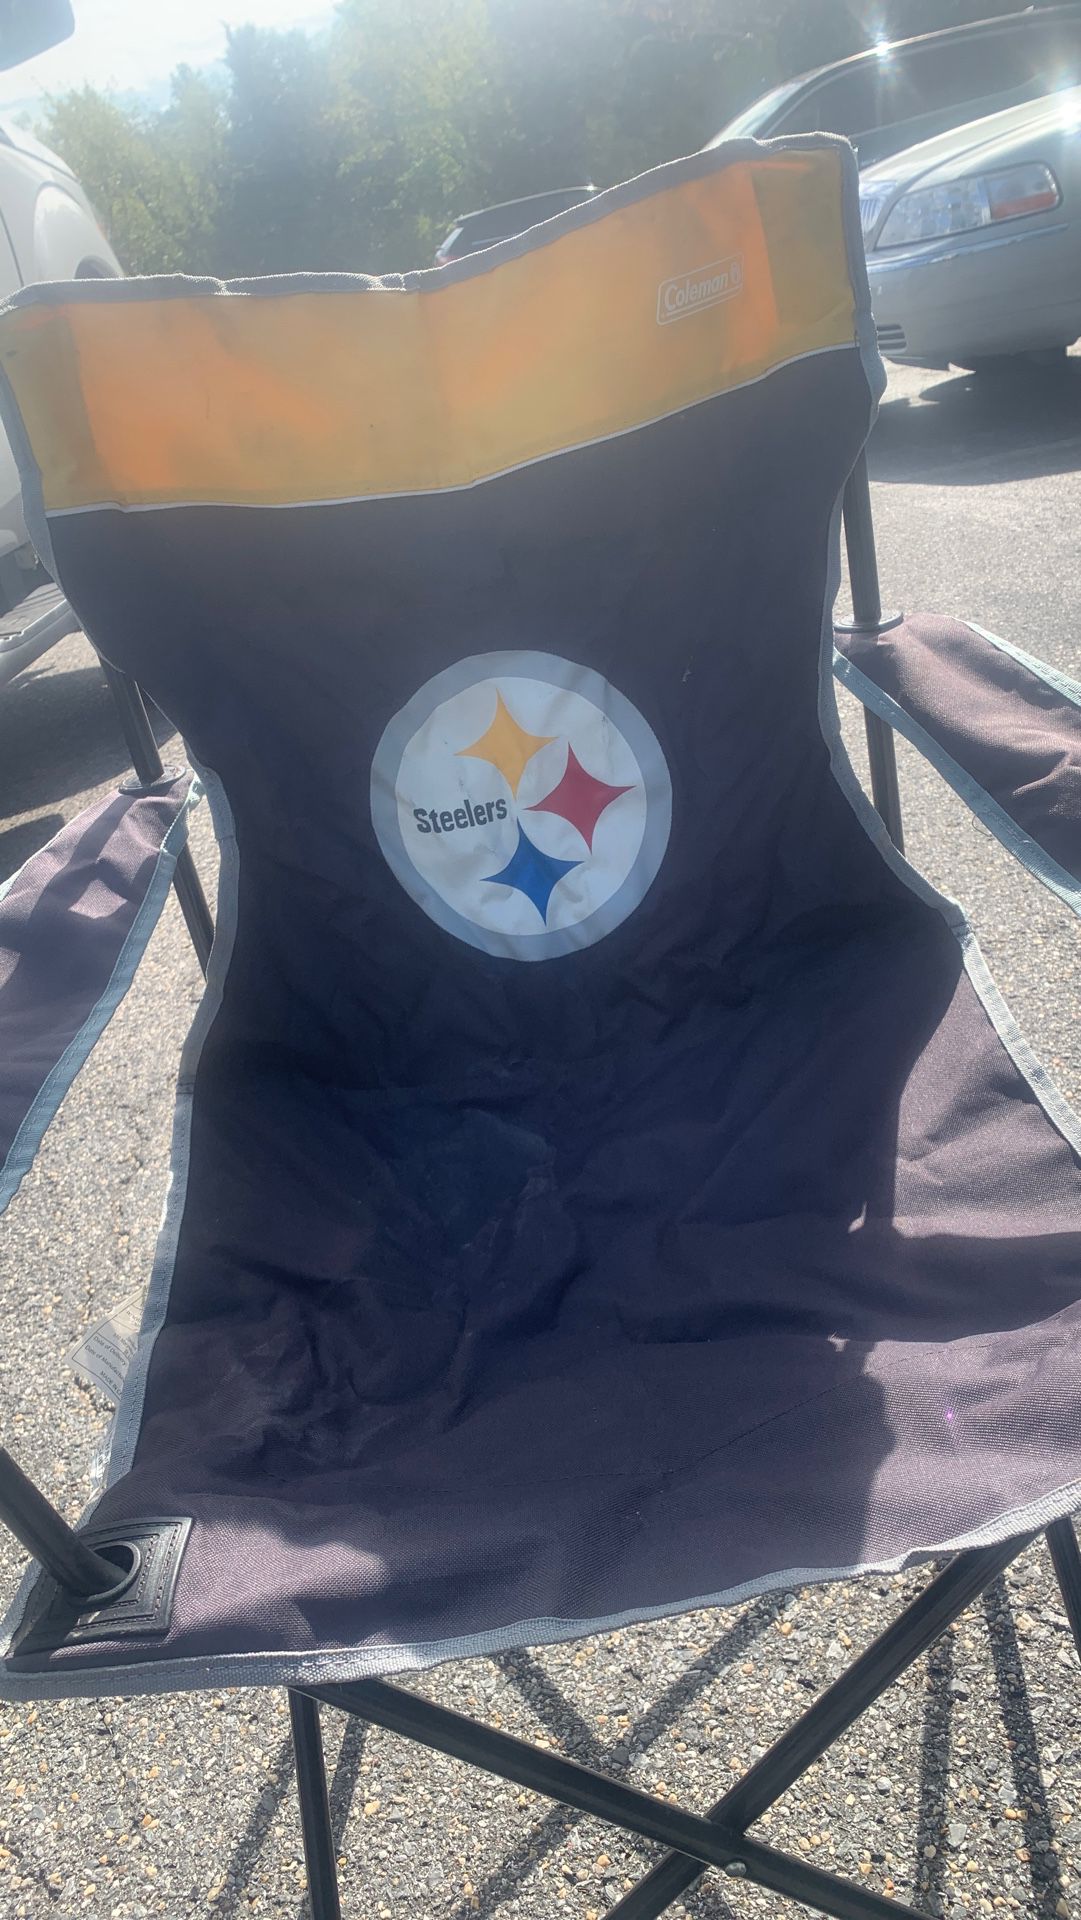 Pittsburgh Steelers lawn chair by Coleman